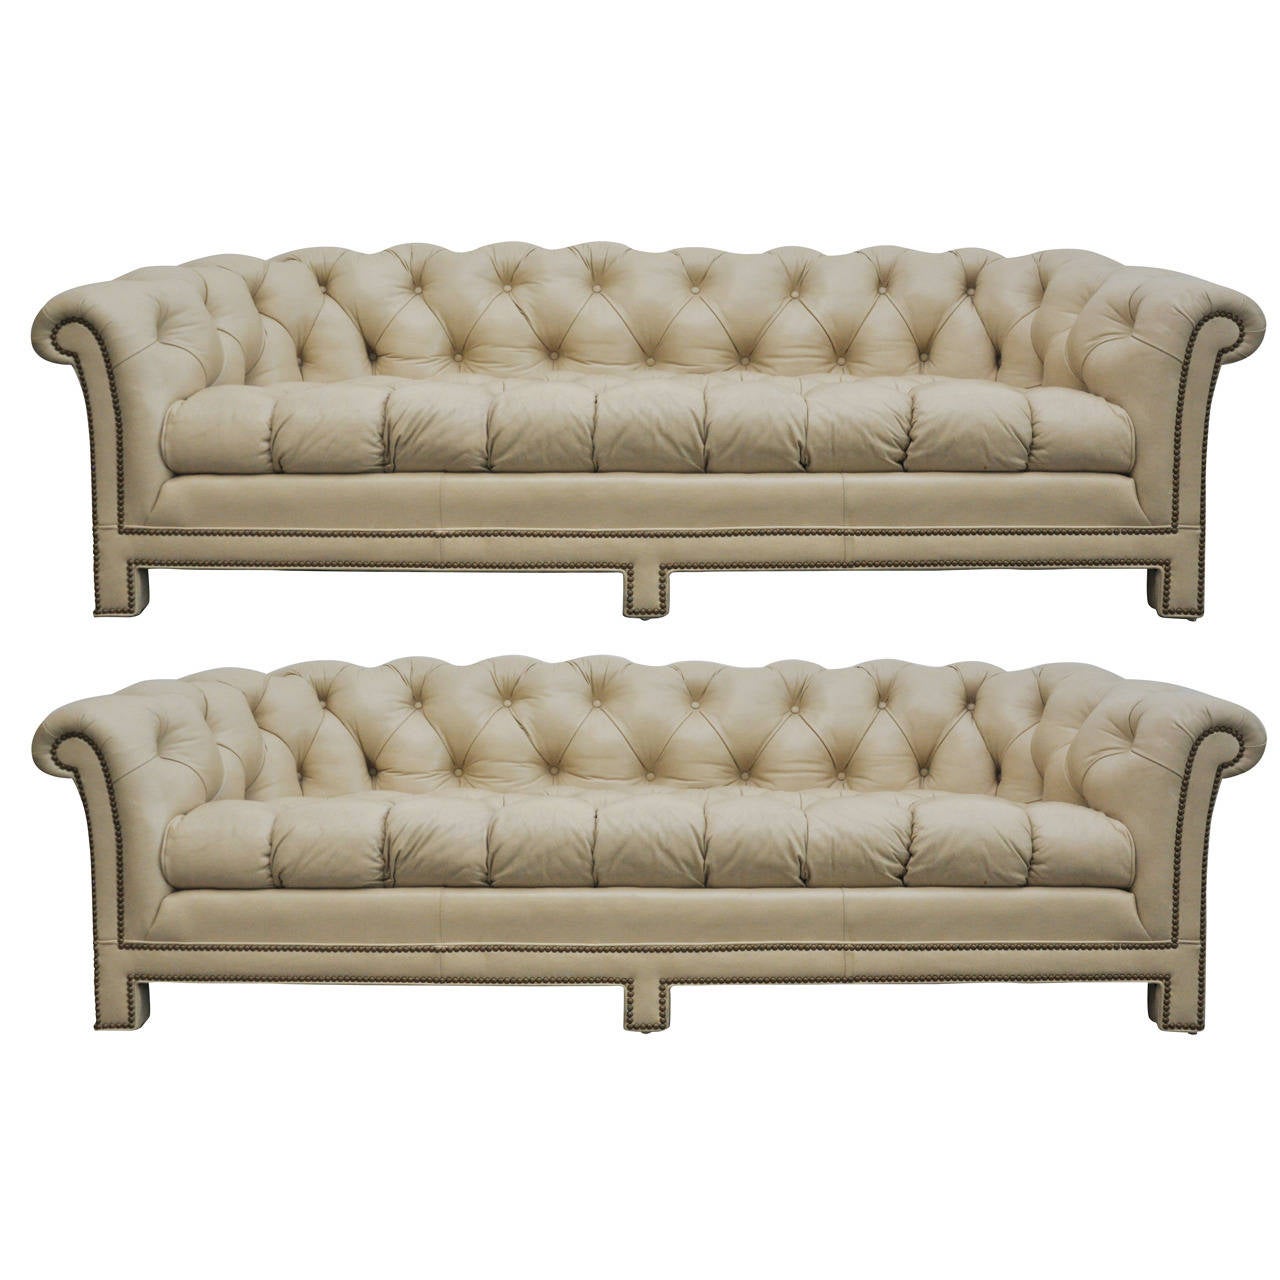 Light Tan Leather Chesterfield Sofas By Hancock And Moore At 1stdibs